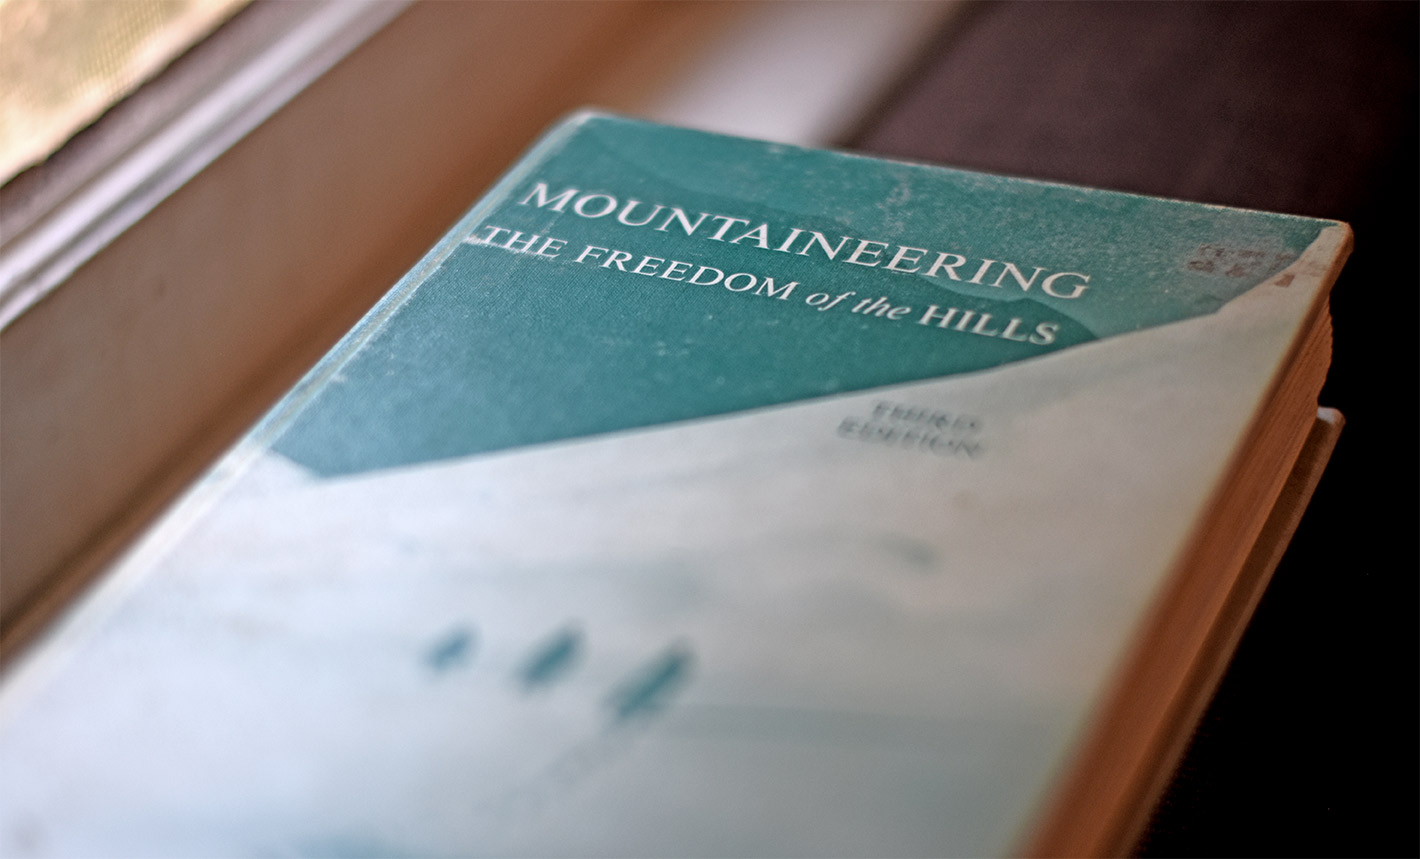 Mountaineering Freedom of the Hills book, with aqua and cream colored cover with mountaineers ascending a snow-covered peak